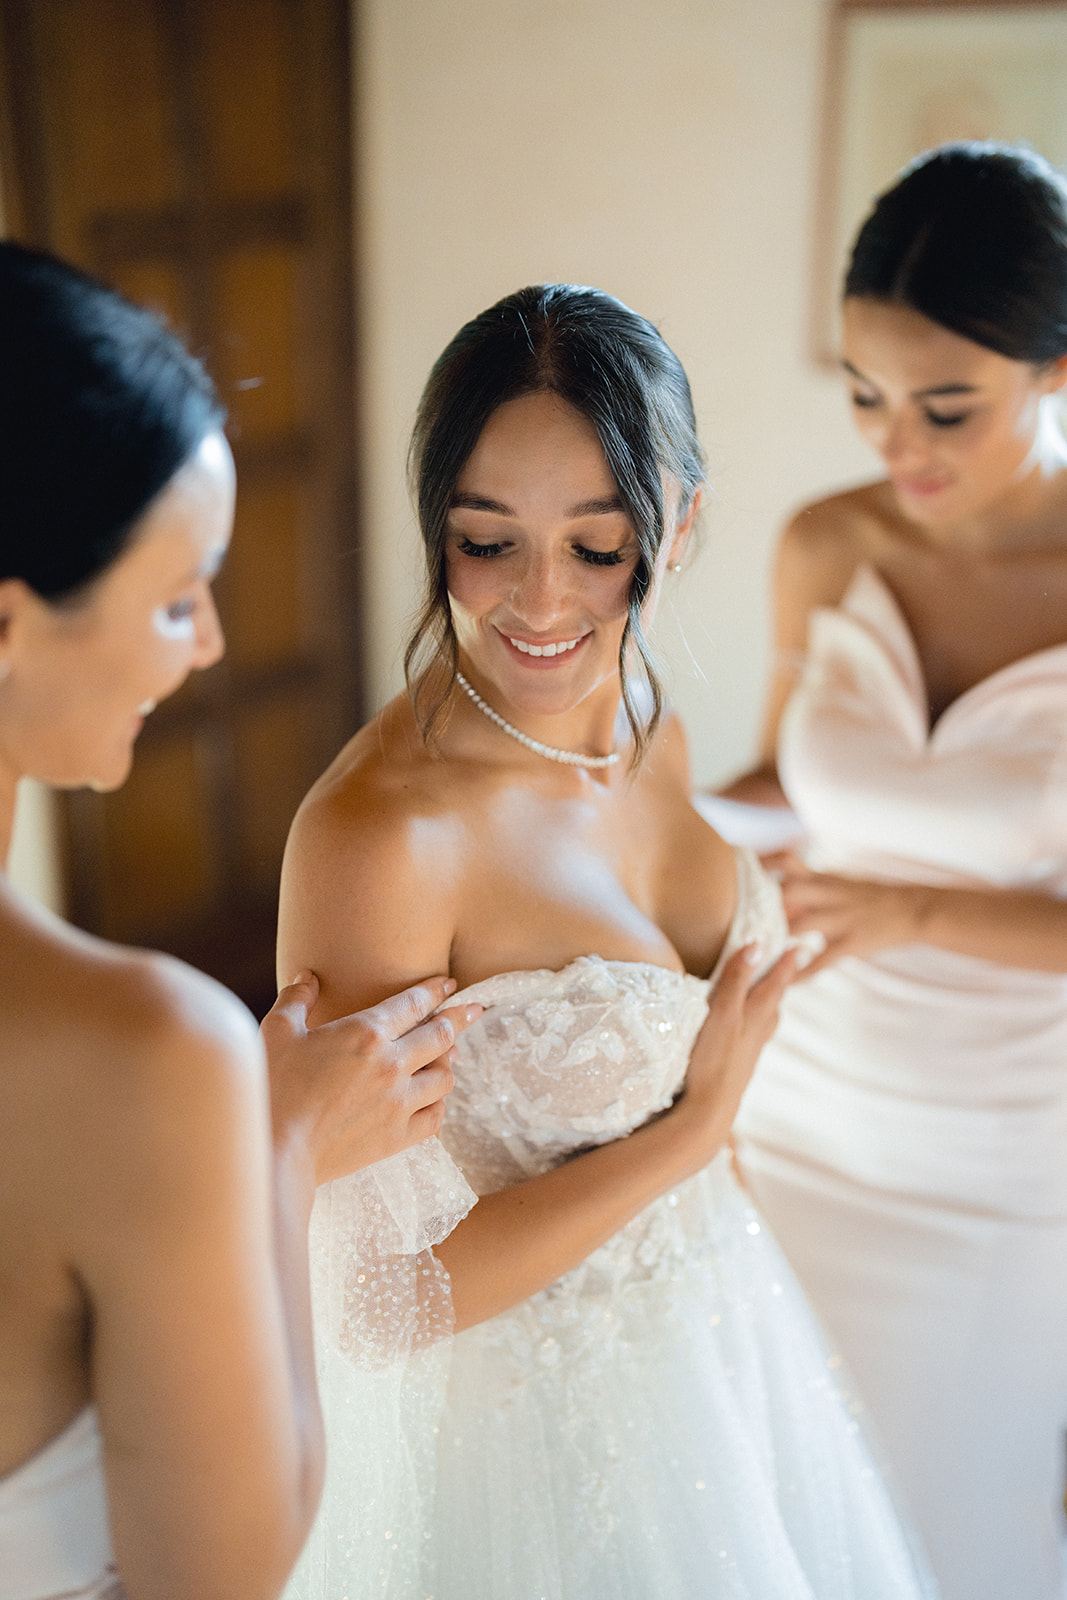 The bride smiles as the bridesmaids help her put on the dress